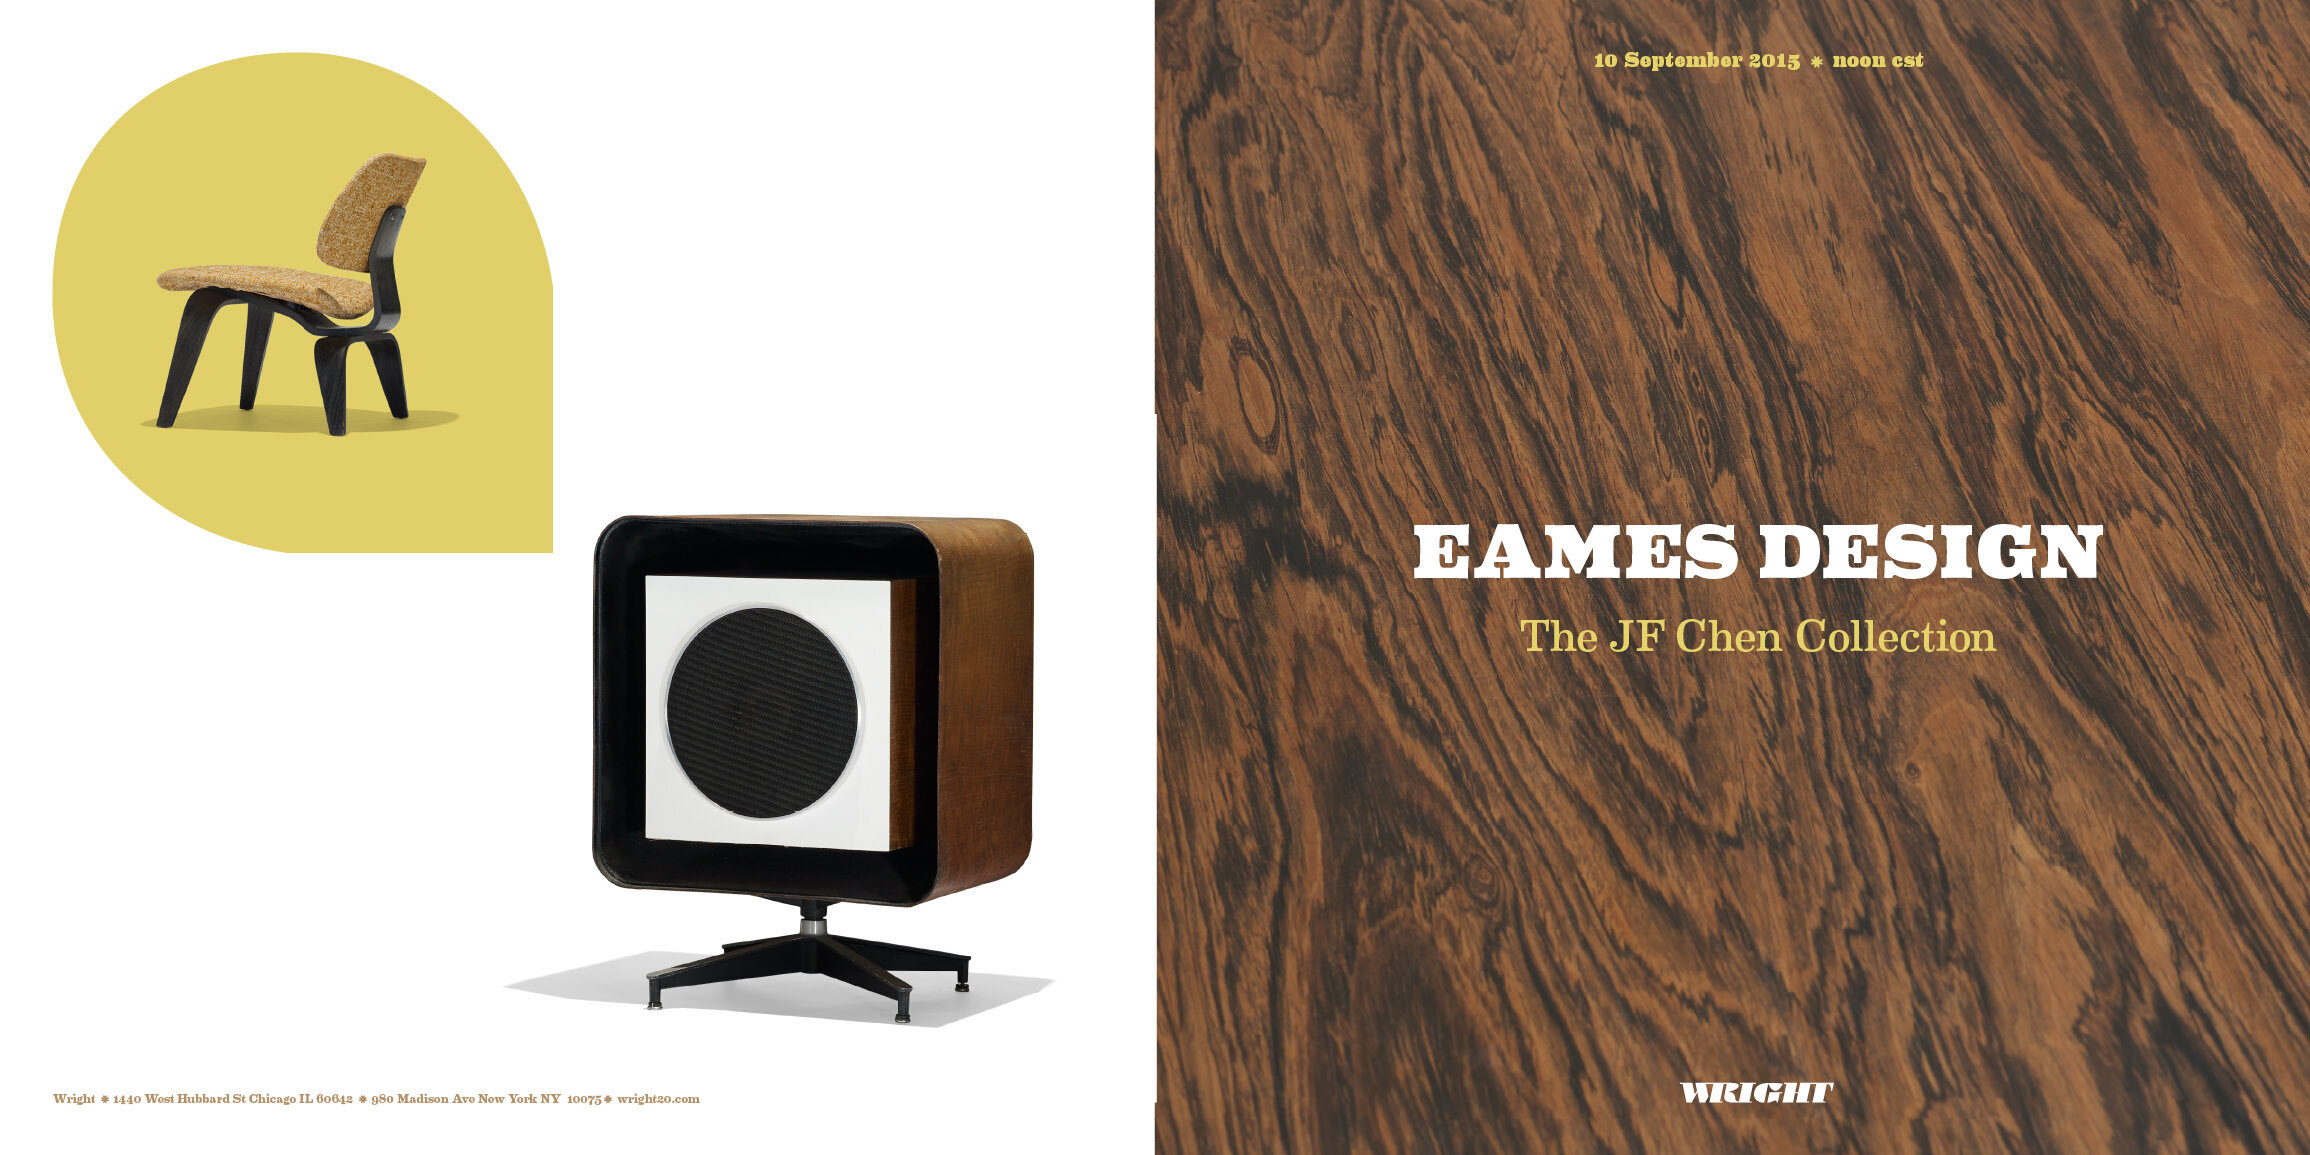 View or download the Eames Design: The JF Chen Collection catalog